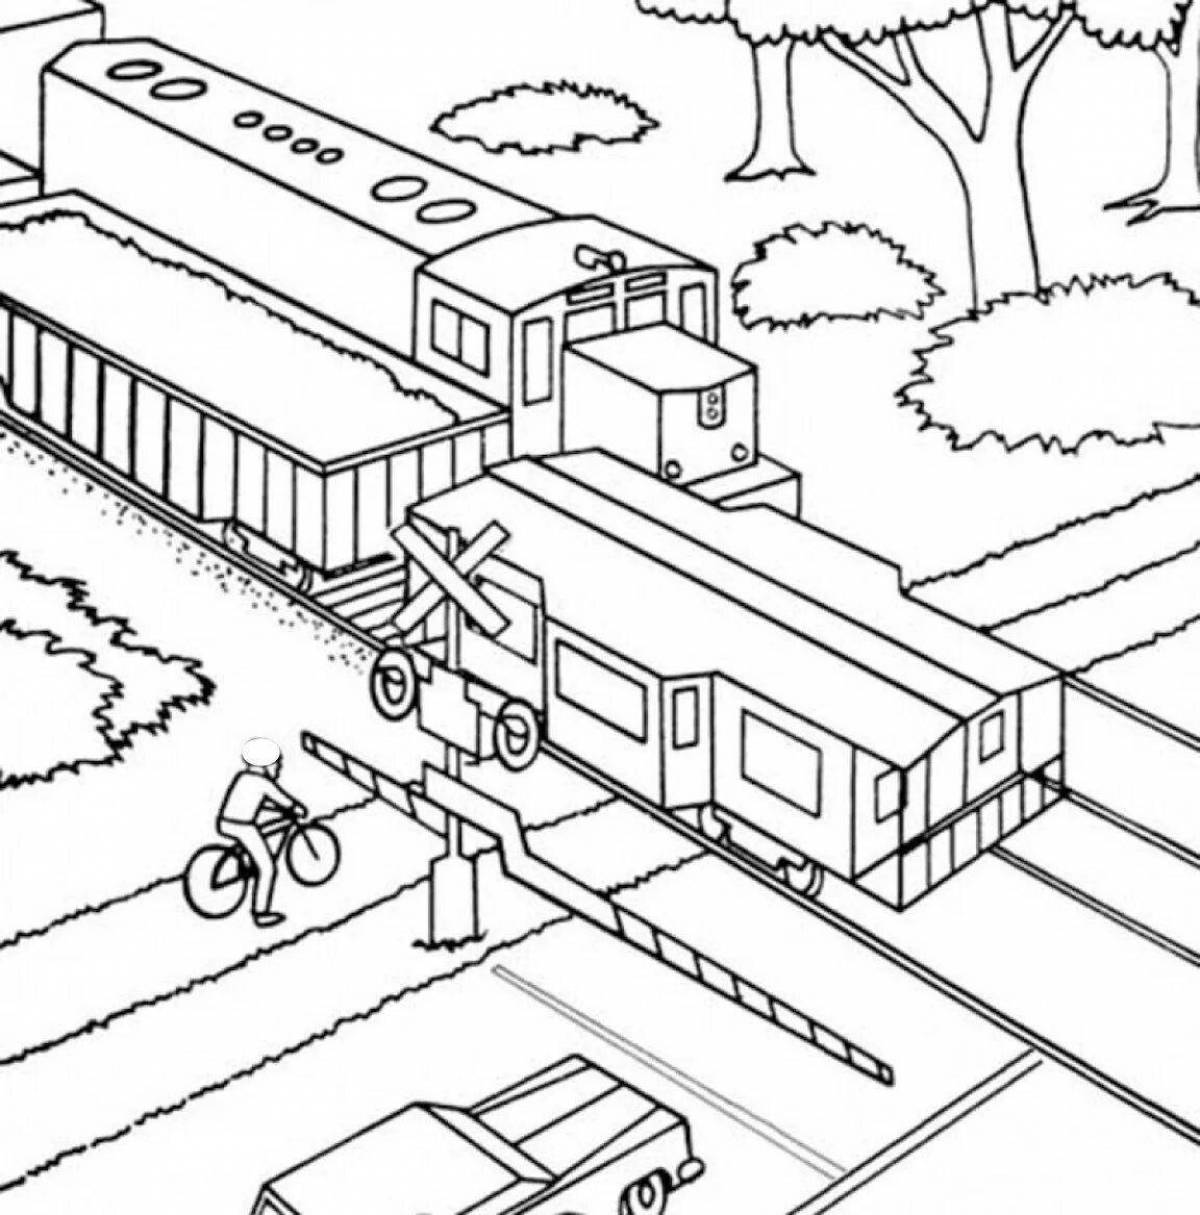 Colorful road coloring page for kids